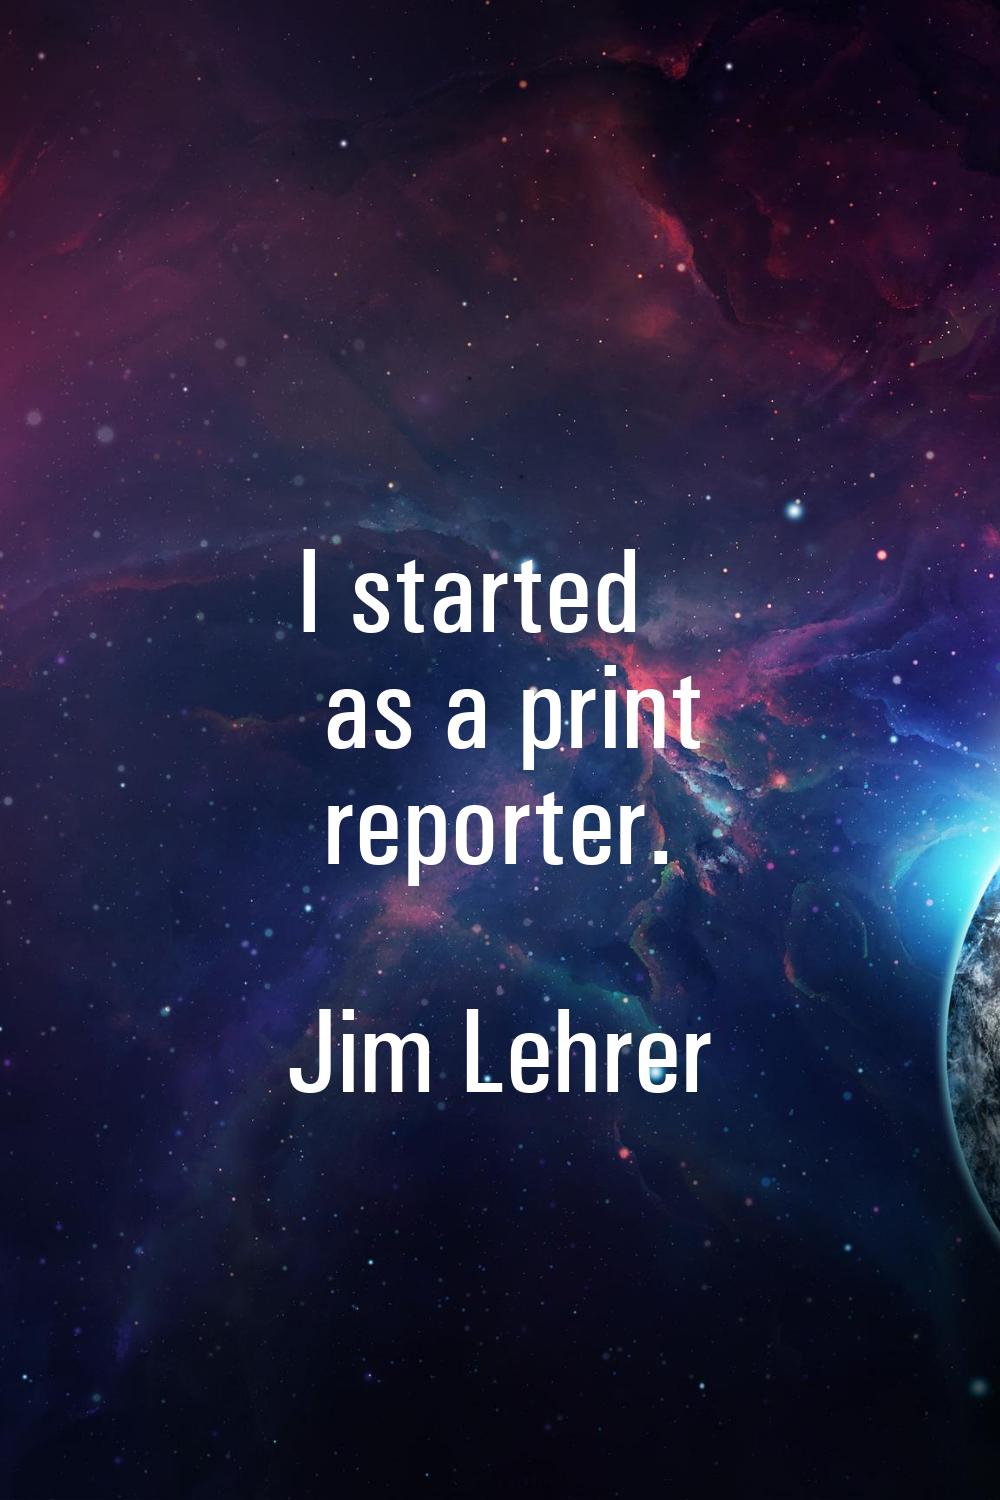 I started as a print reporter.